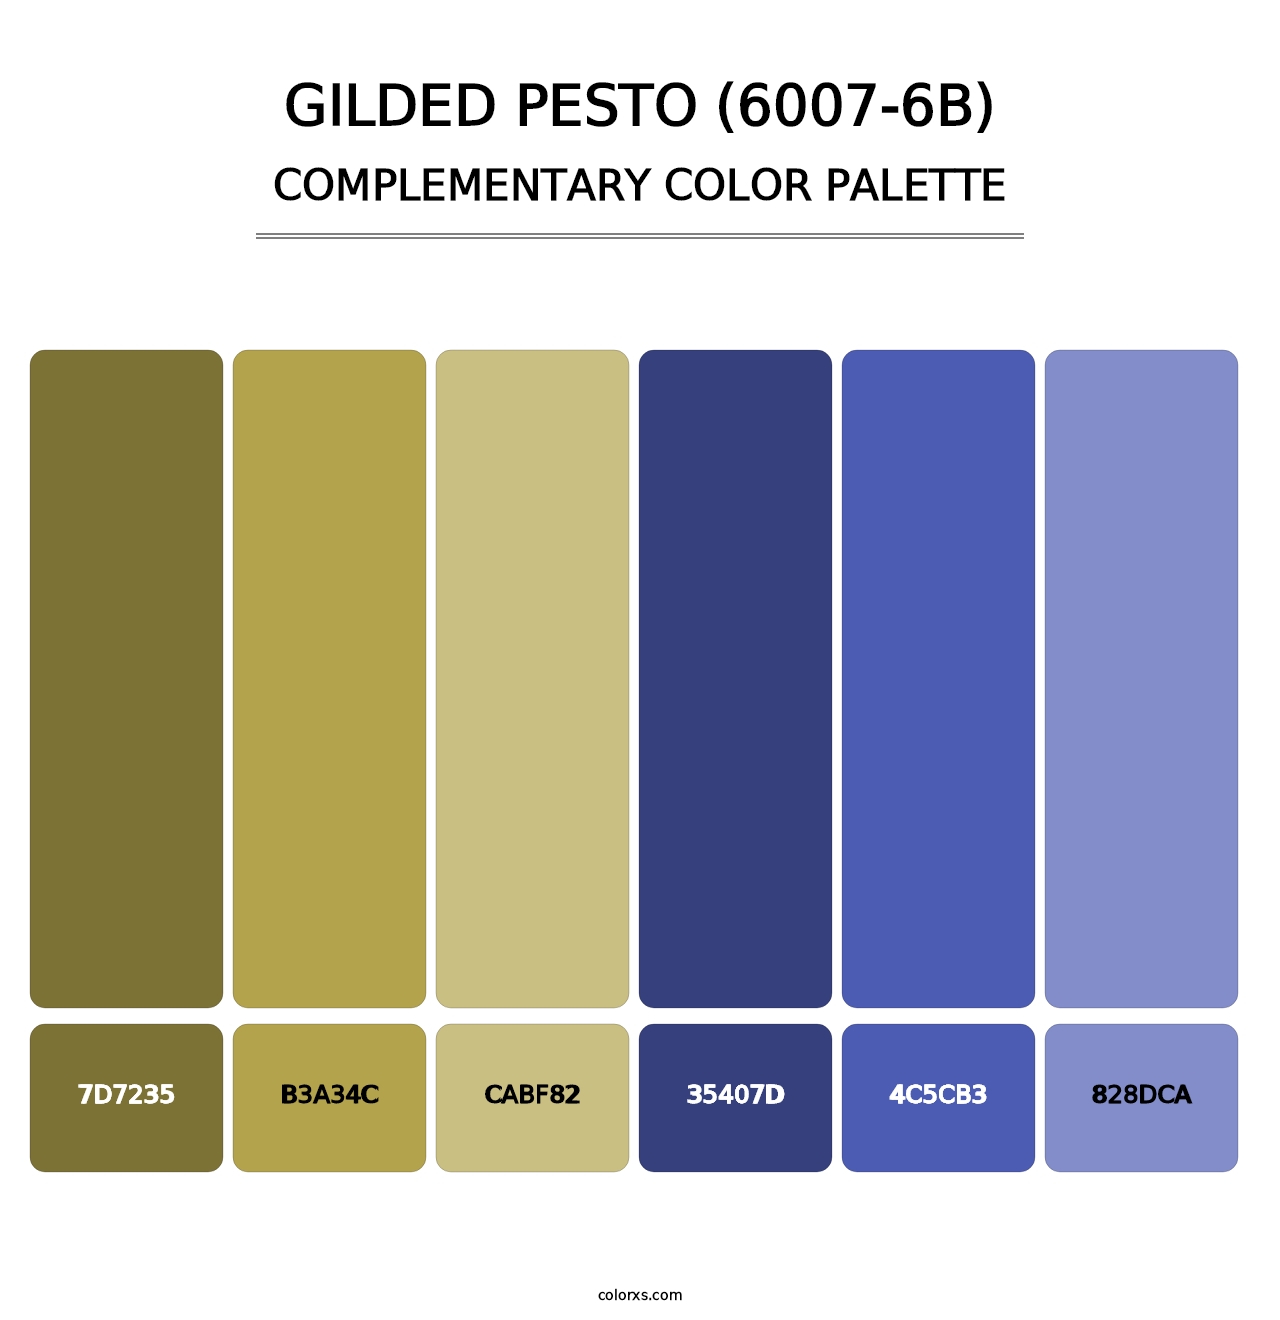 Gilded Pesto (6007-6B) - Complementary Color Palette